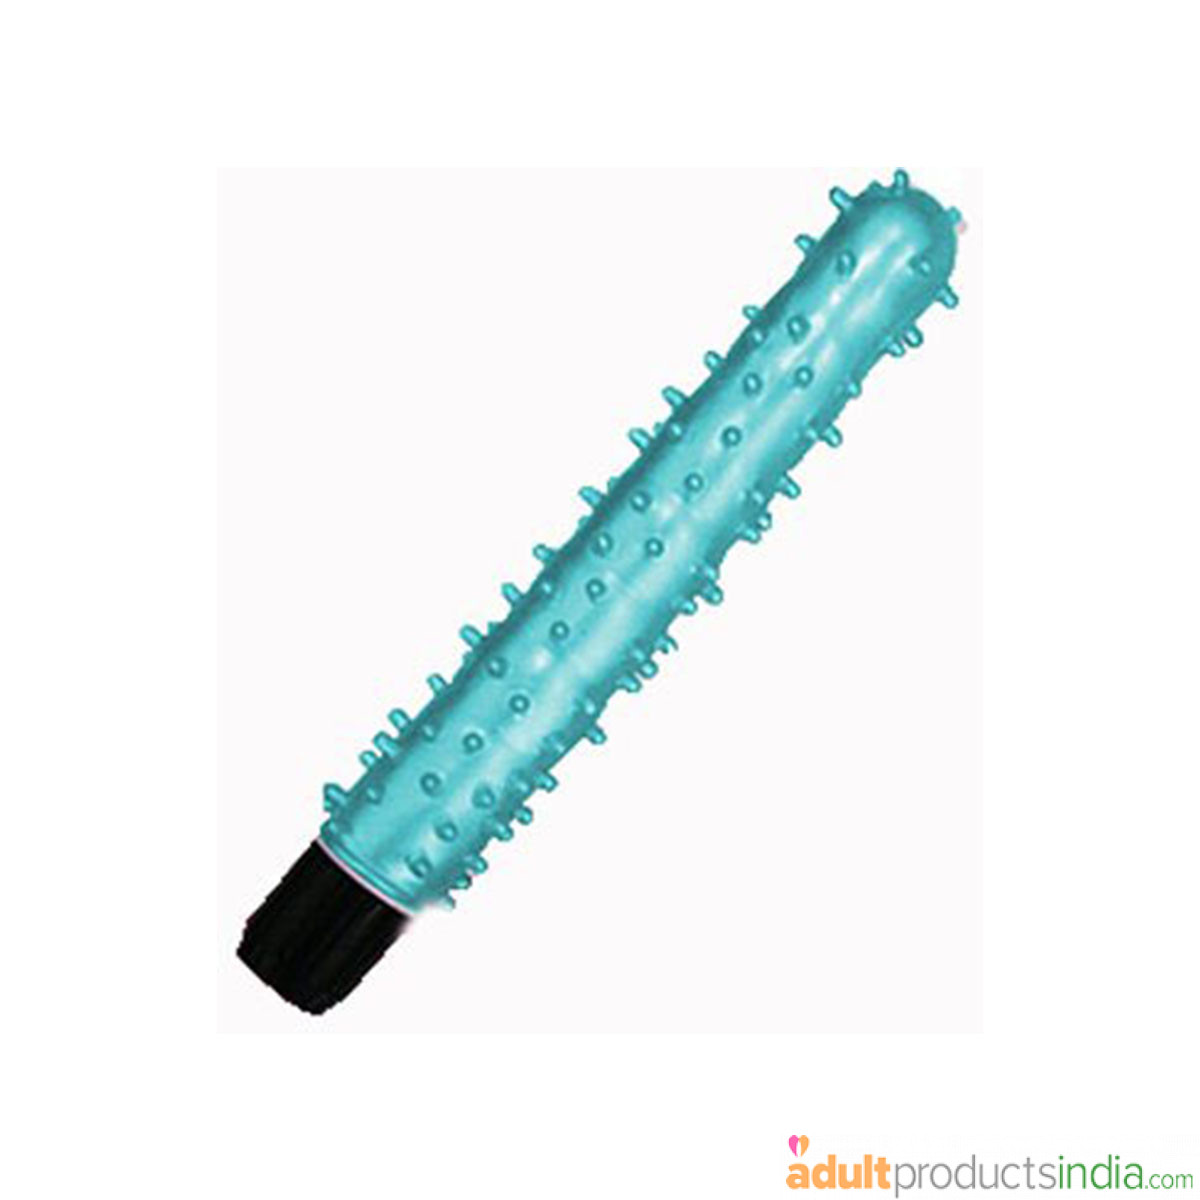 All-Rounded Vibrator